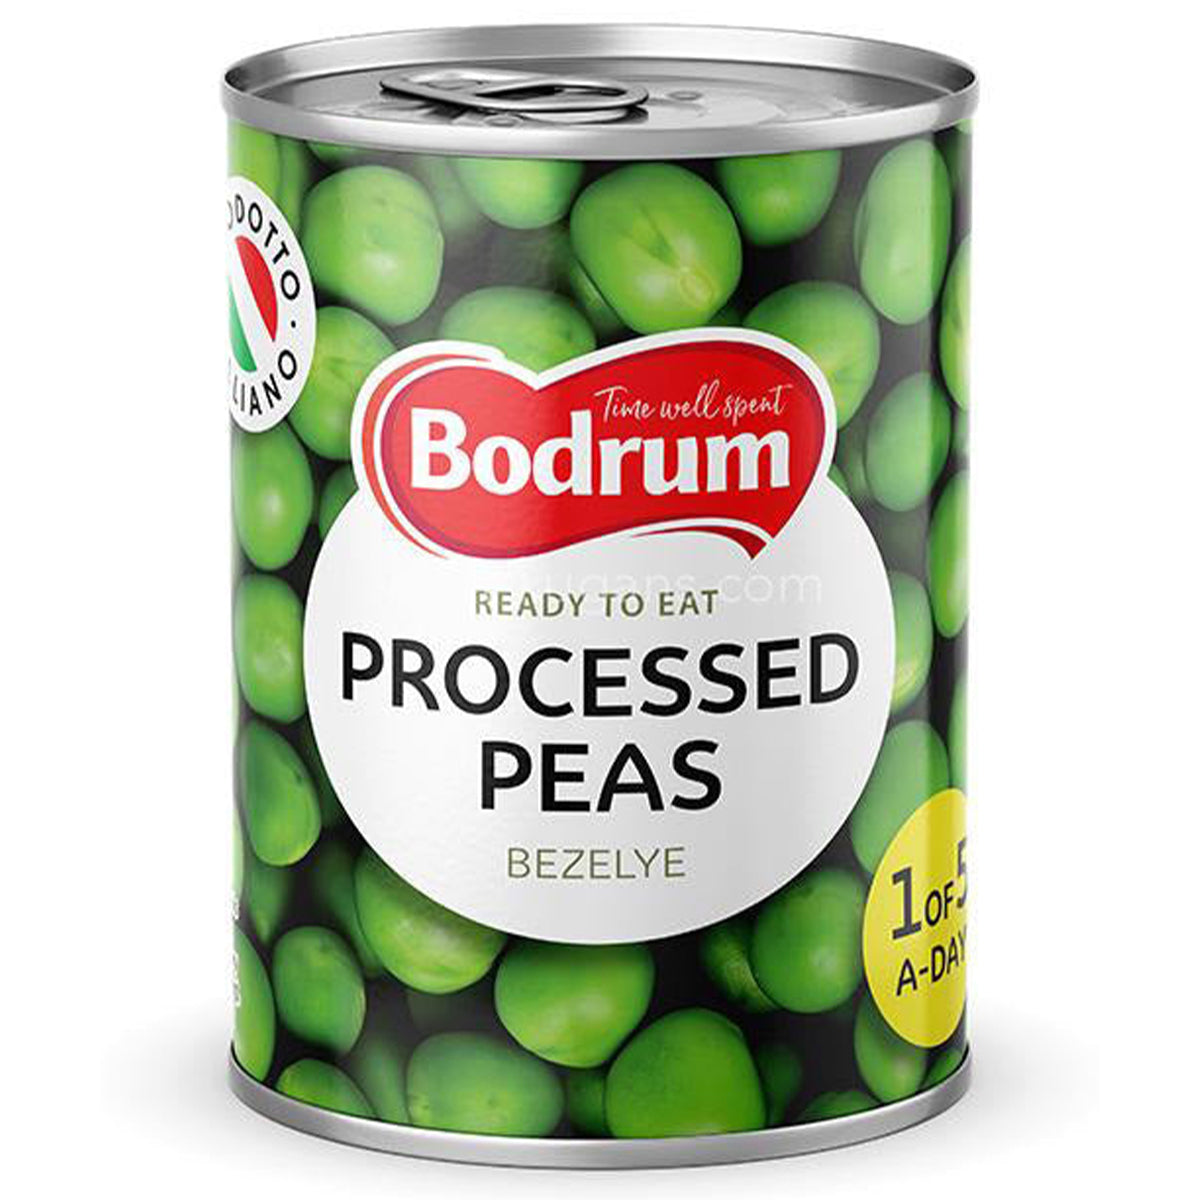 A can of Bodrum - Green Peas - 400g on a white background.